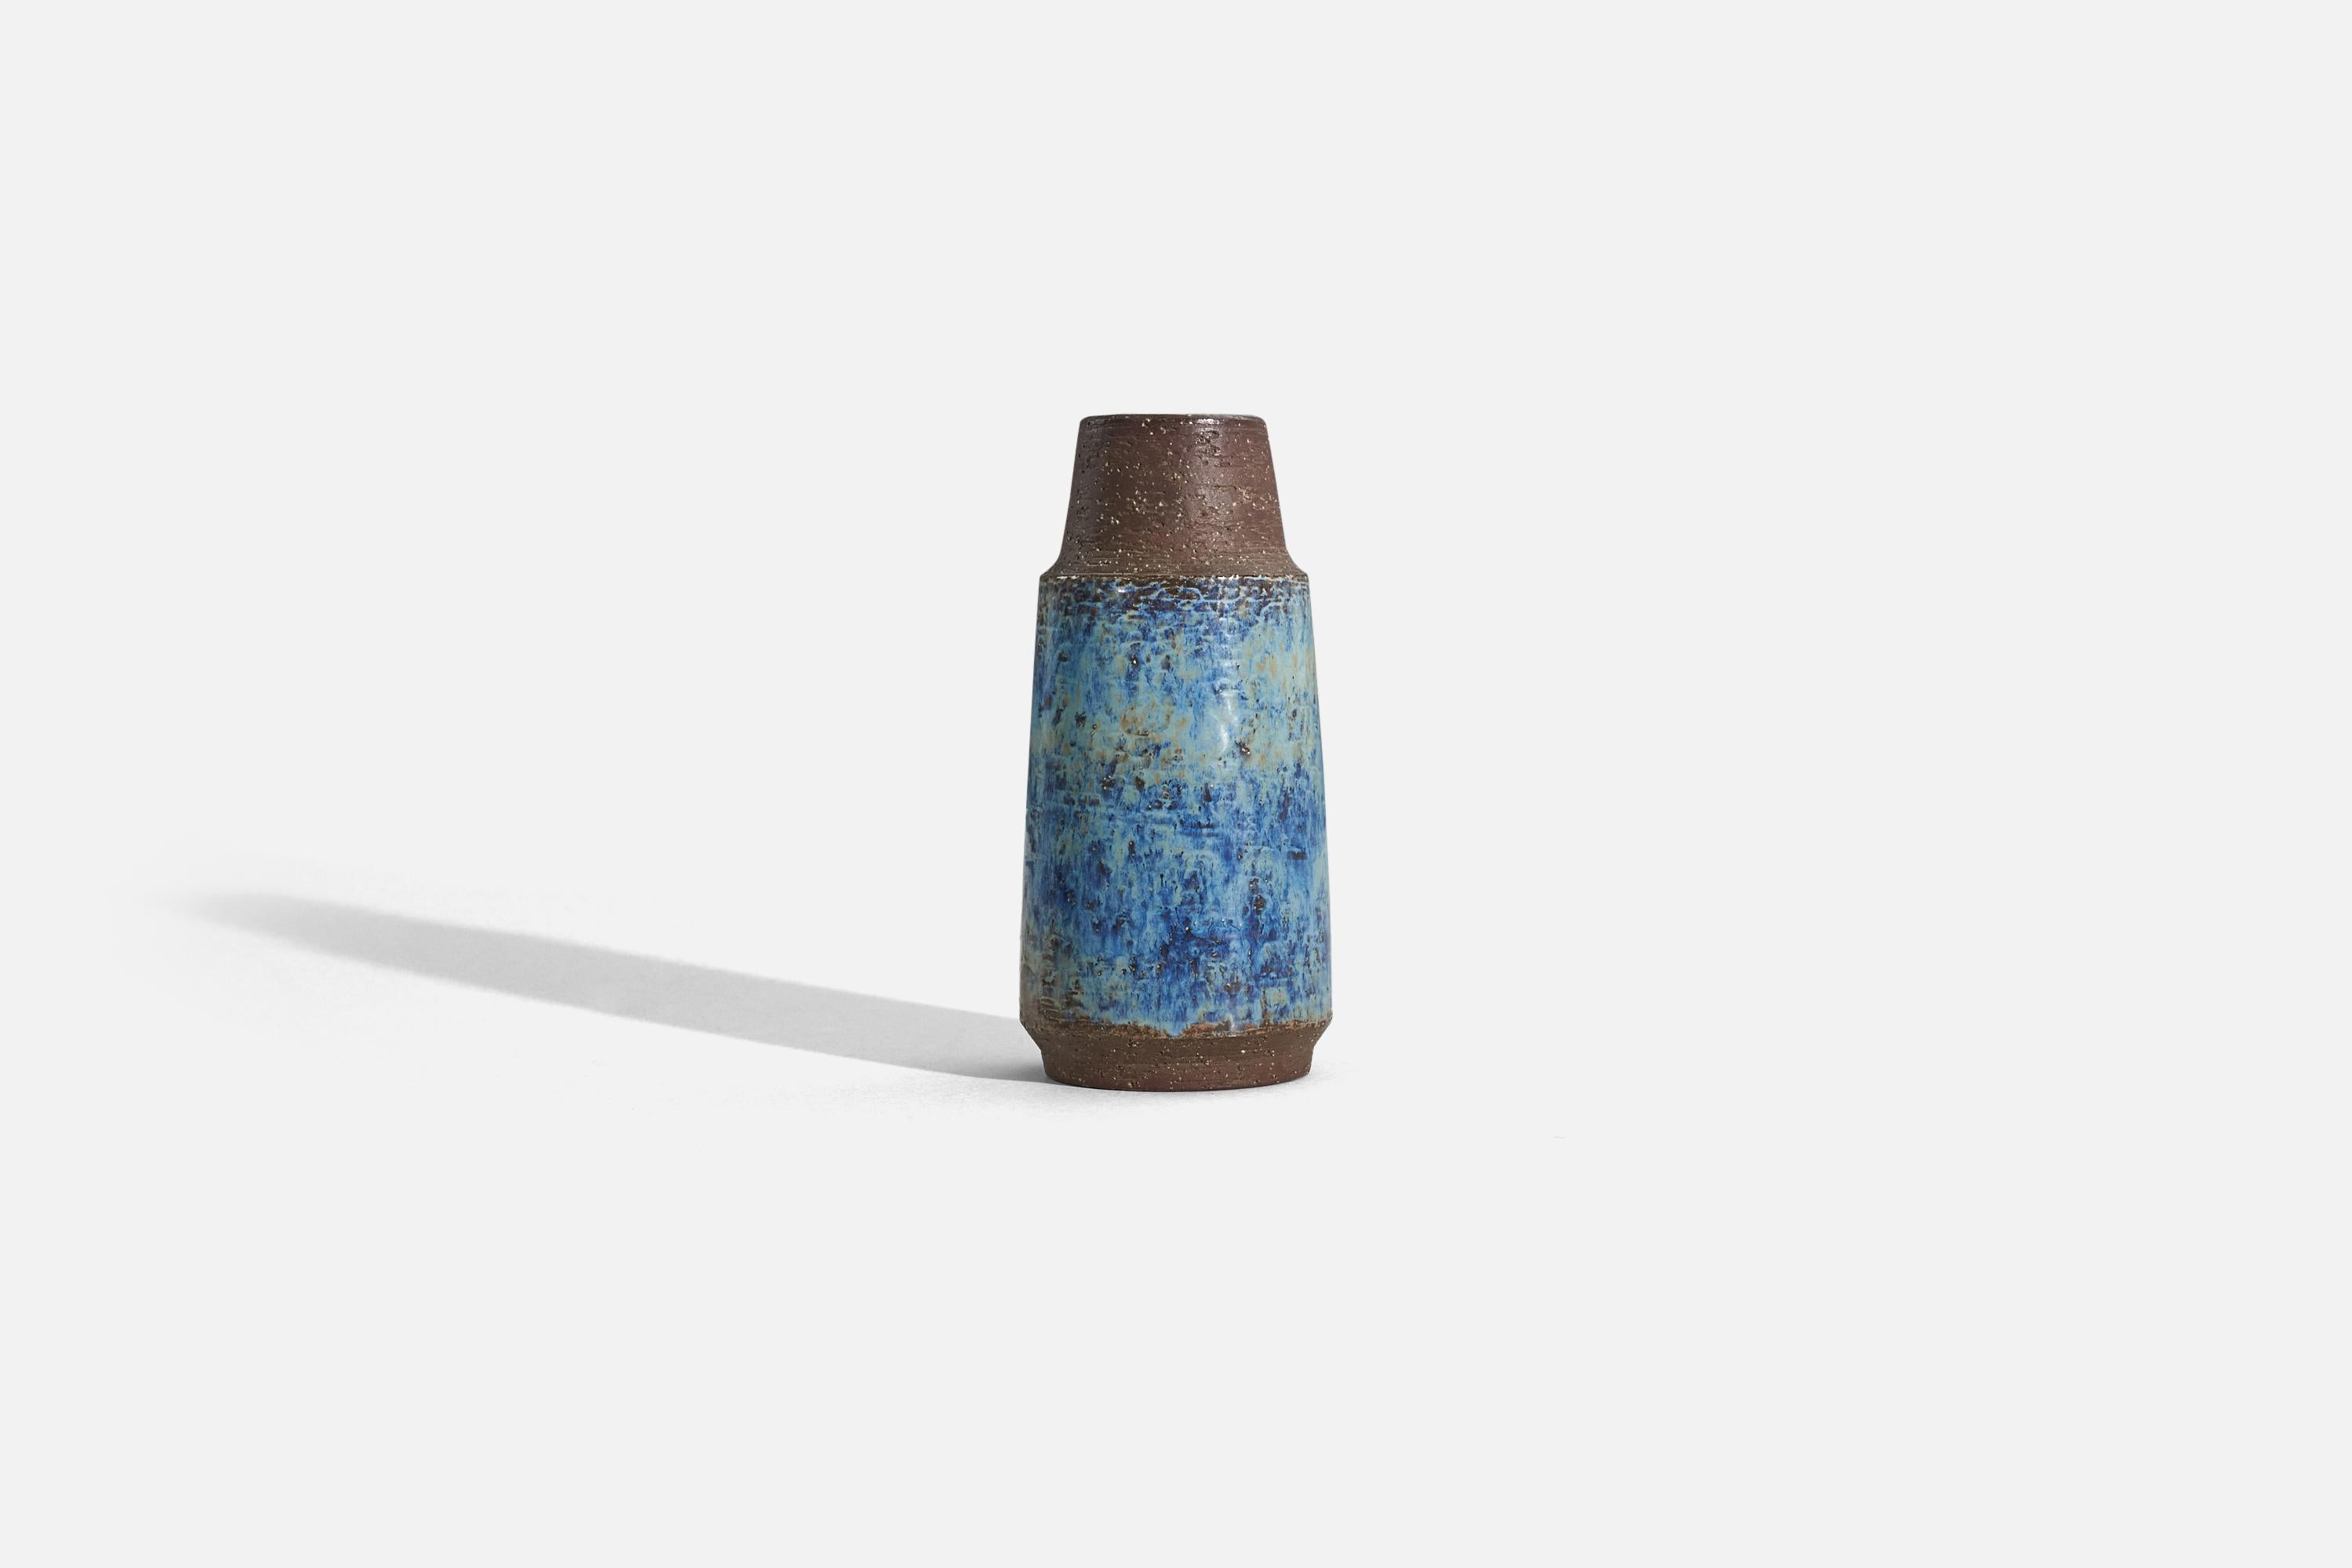 A brown and blue-glazed stoneware vase designed and produced by Michael Andersen Keramik, Denmark, 1960s. 

